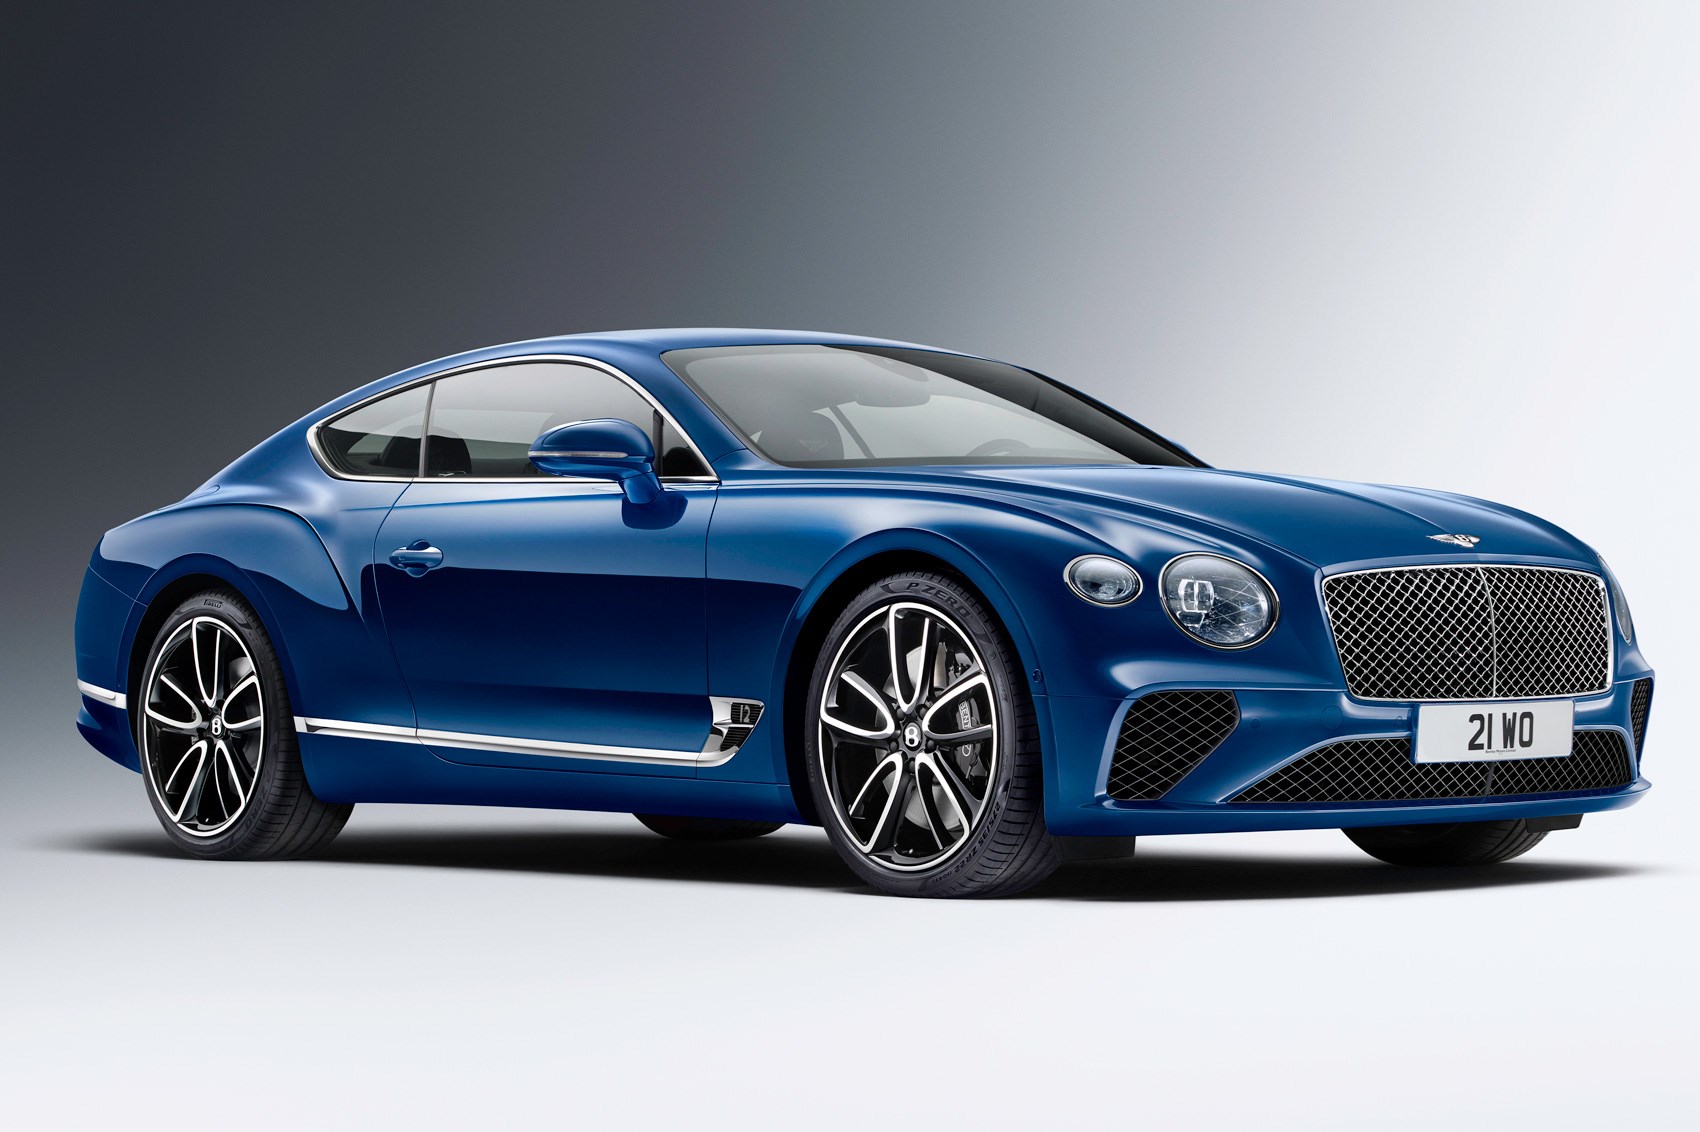 The Ultimate Luxury: The 2018 Bentley Continental GT